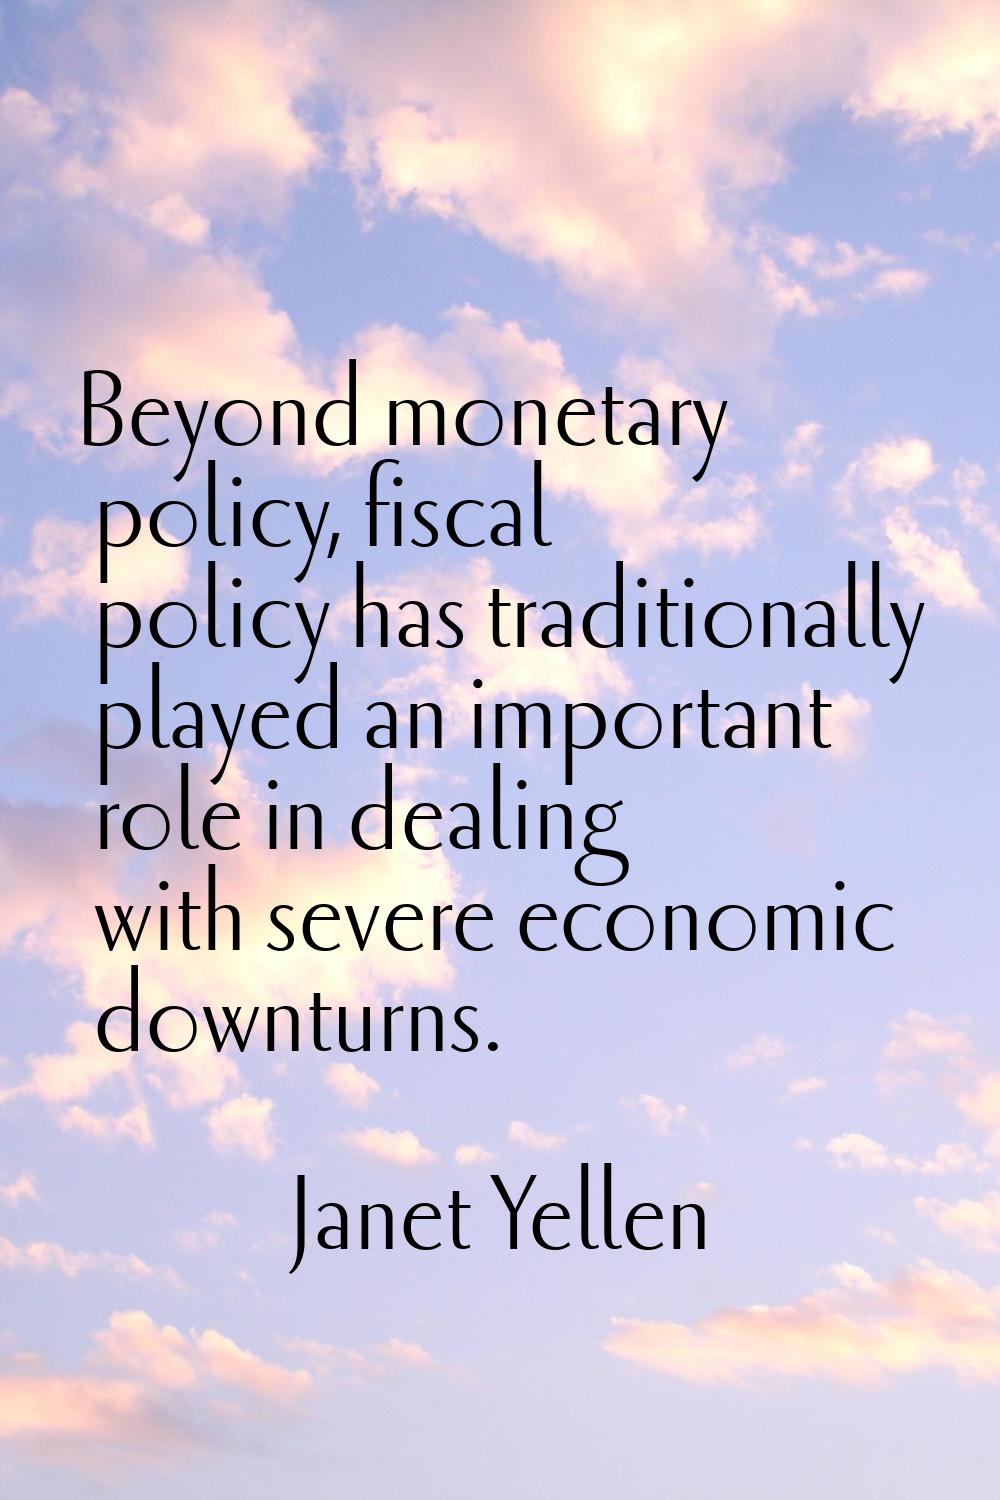 Beyond monetary policy, fiscal policy has traditionally played an important role in dealing with se